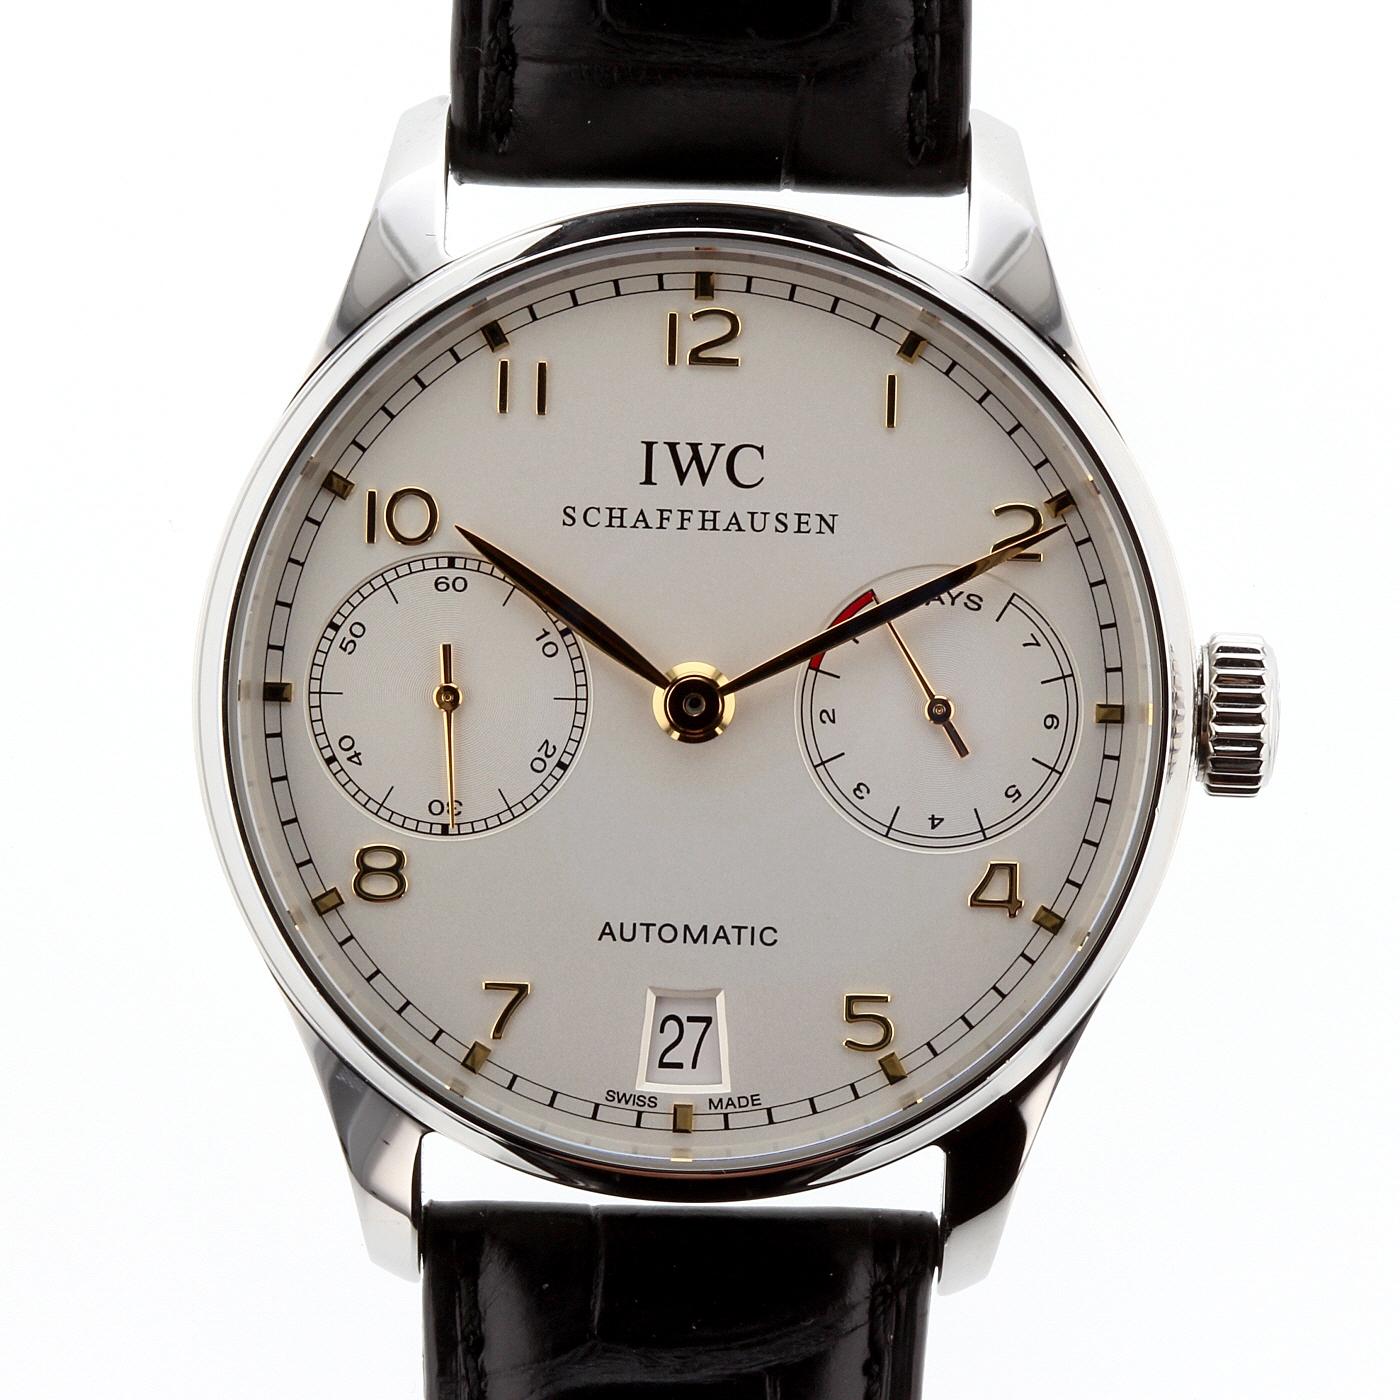 NEW IWC PORTUGUESE Automatic 7 Day Power Reserve Steel Mens Watch IW500114